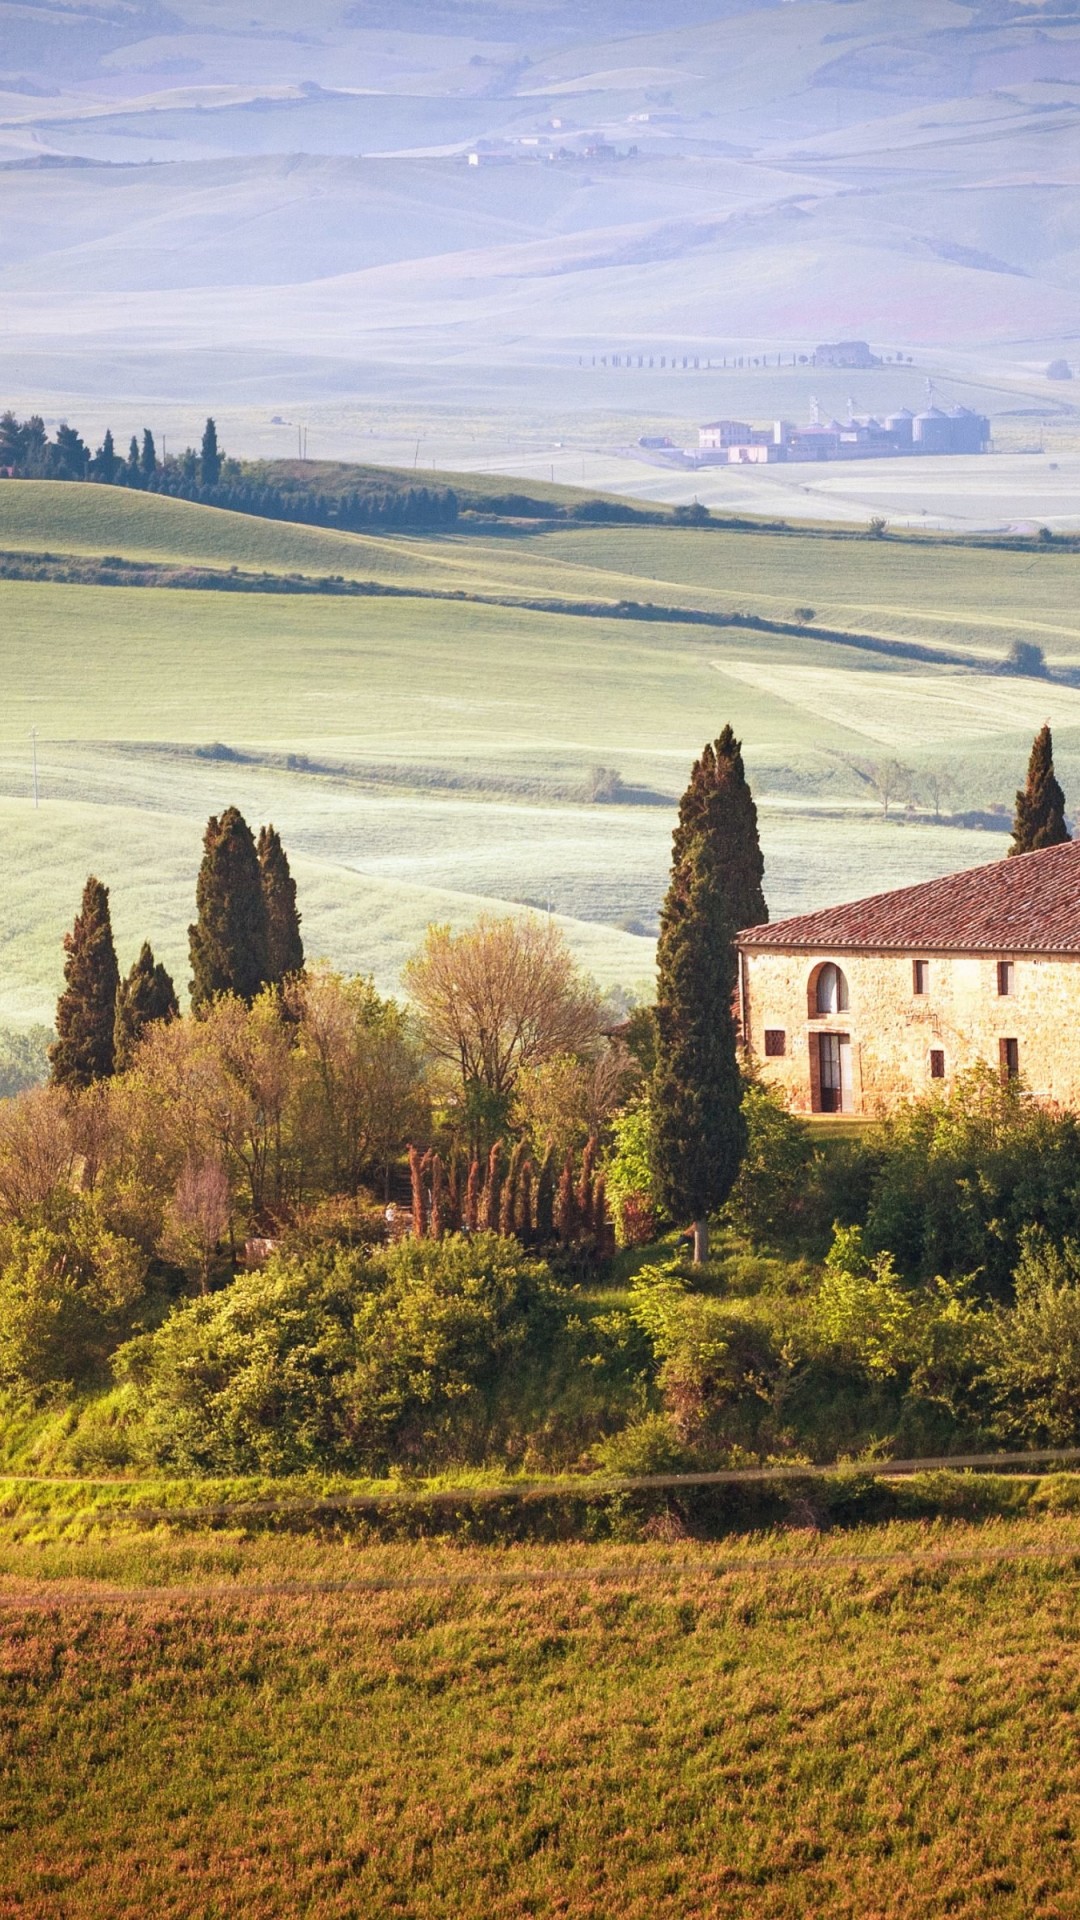 Summer in Tuscany, Italy Wallpaper for LG G2